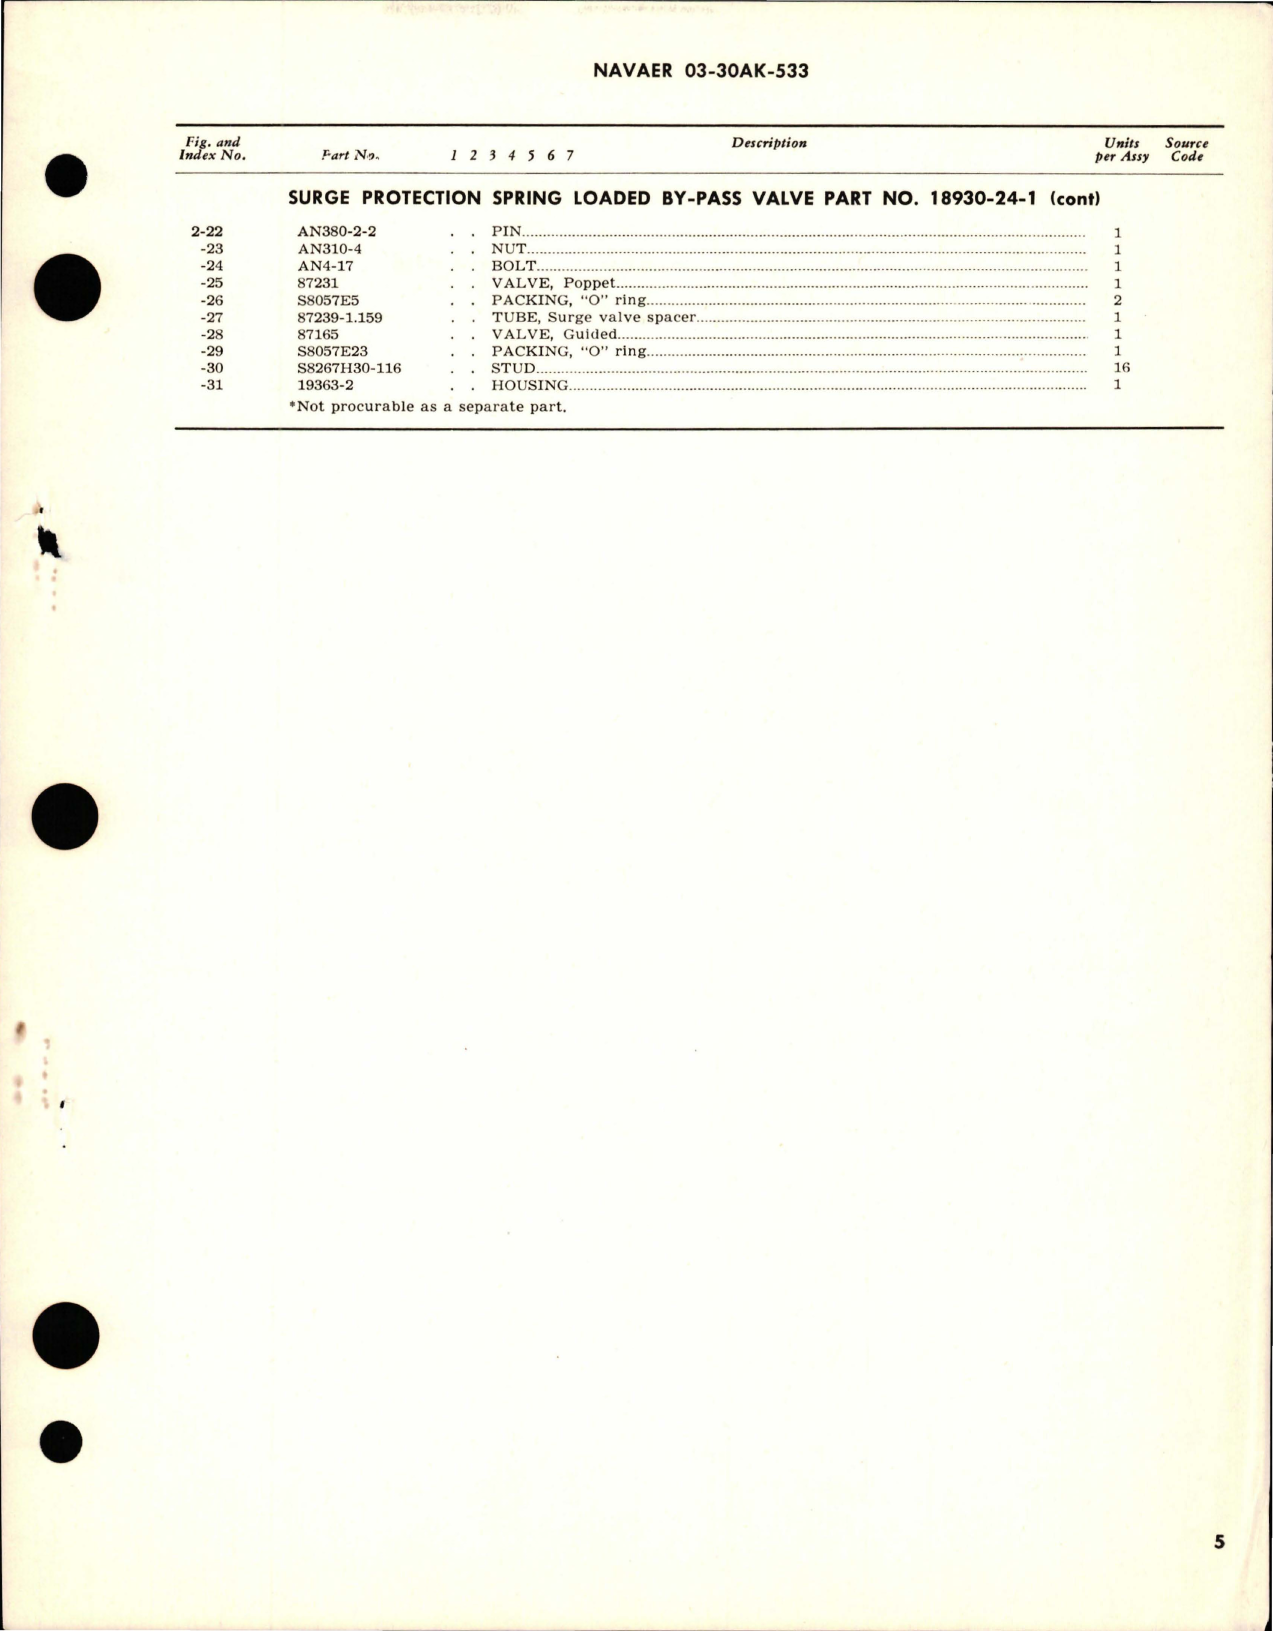 Sample page 5 from AirCorps Library document: Overhaul Instructions with Parts Breakdown for Surge Protection Spring Loaded By-Pass Valve - 18930-24-1